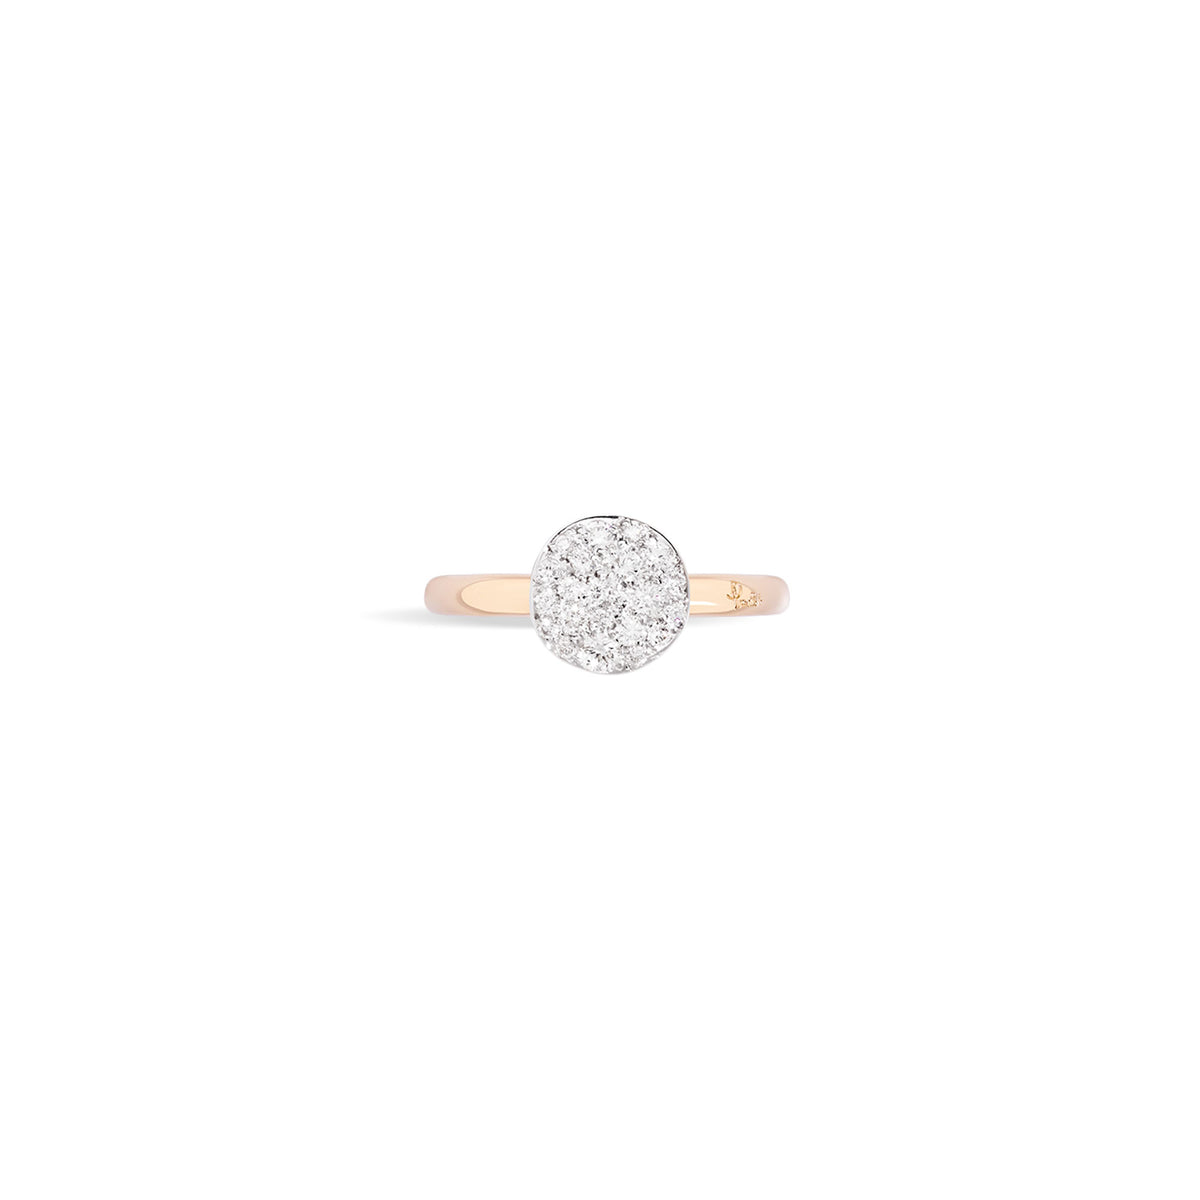 Sabbia Ring in 18k Rose Gold with White Diamonds - Orsini Jewellers NZ